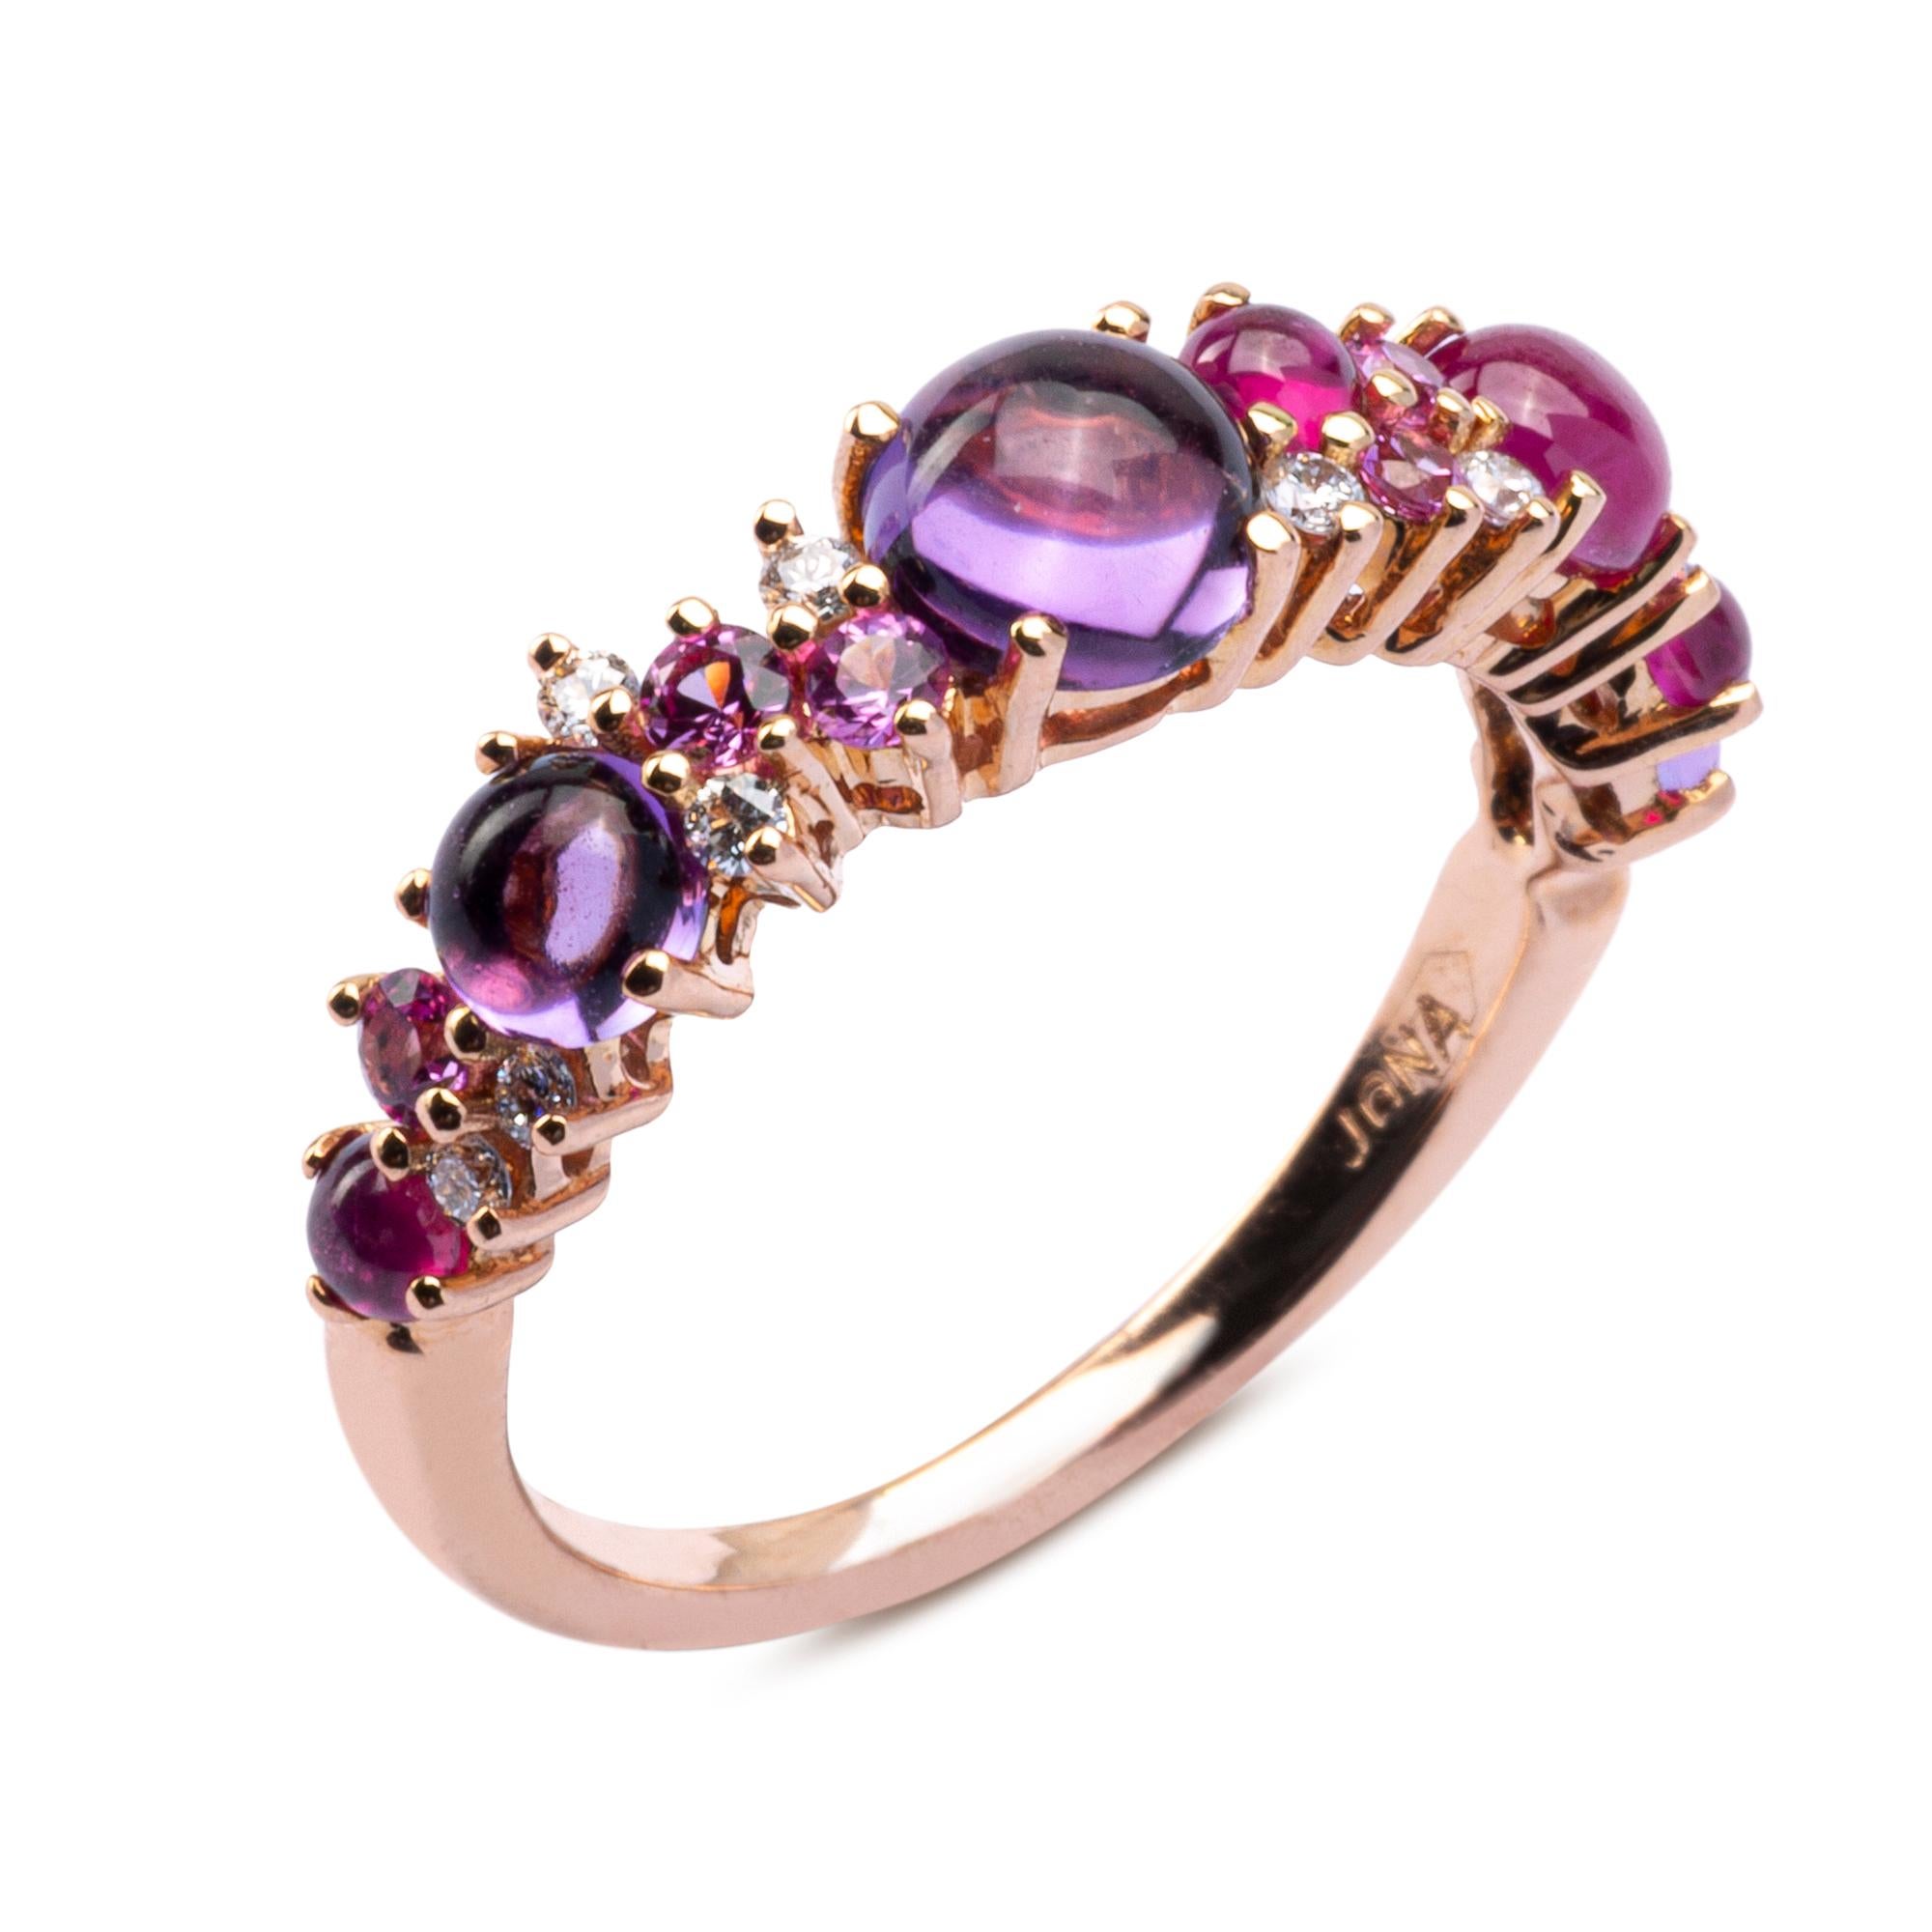 Jona design collection, hand crafted in Italy, 18 Karat rose gold ring band, set with, cabochon rubies, cabochon amethysts, pink sapphires and 0.12 carats of white diamonds. Size: US 6/ EU 12. Can be sized to any specification.
All Jona jewelry is